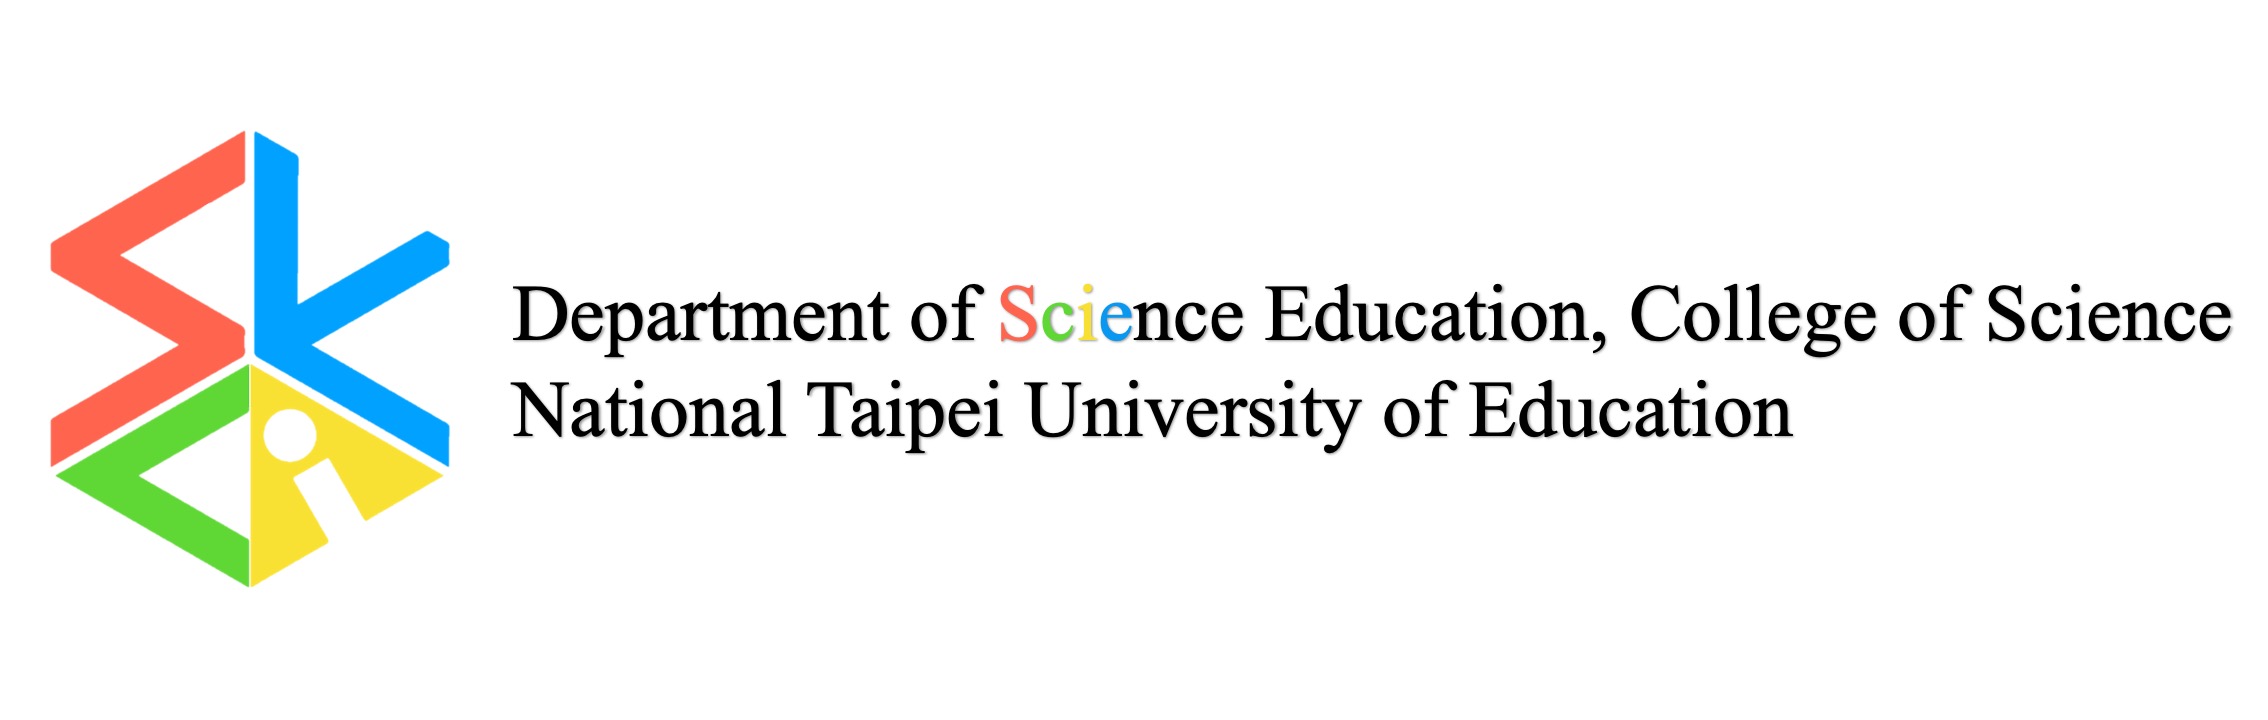 Department of Science,College of Science,National Taipei University of Education